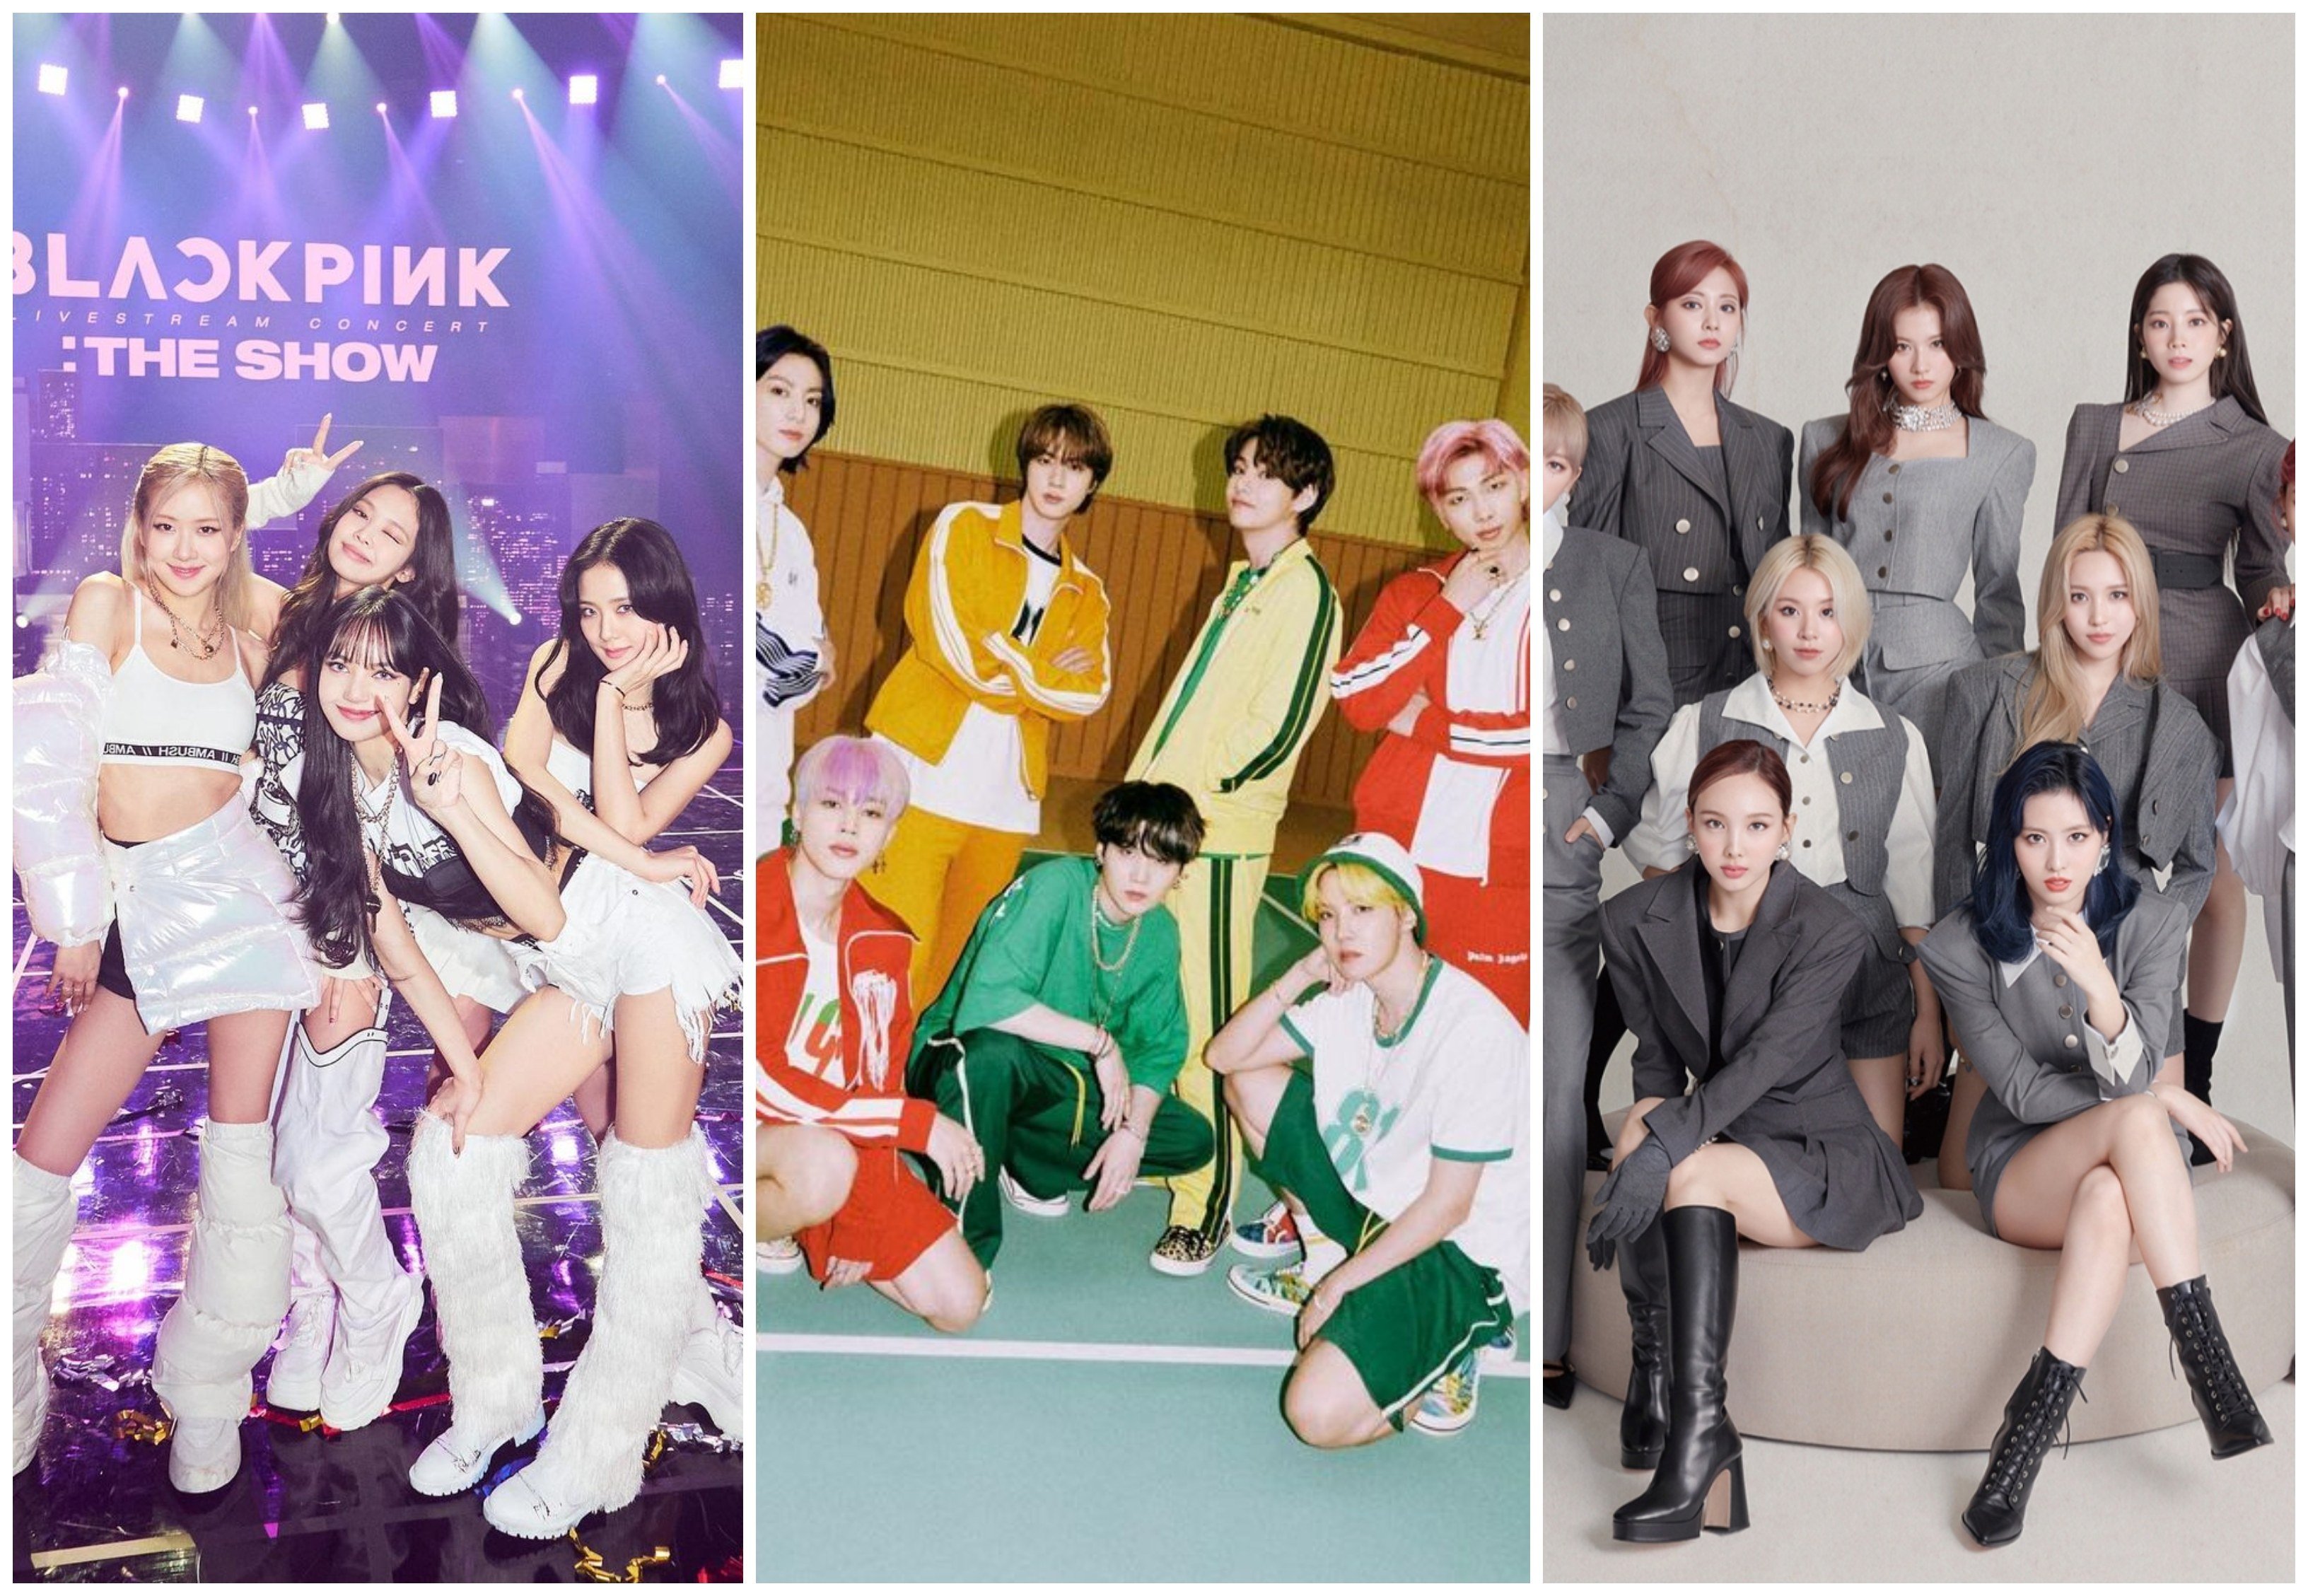 19 K-Pop Girl Group Fandom Names And Their Meanings - Koreaboo